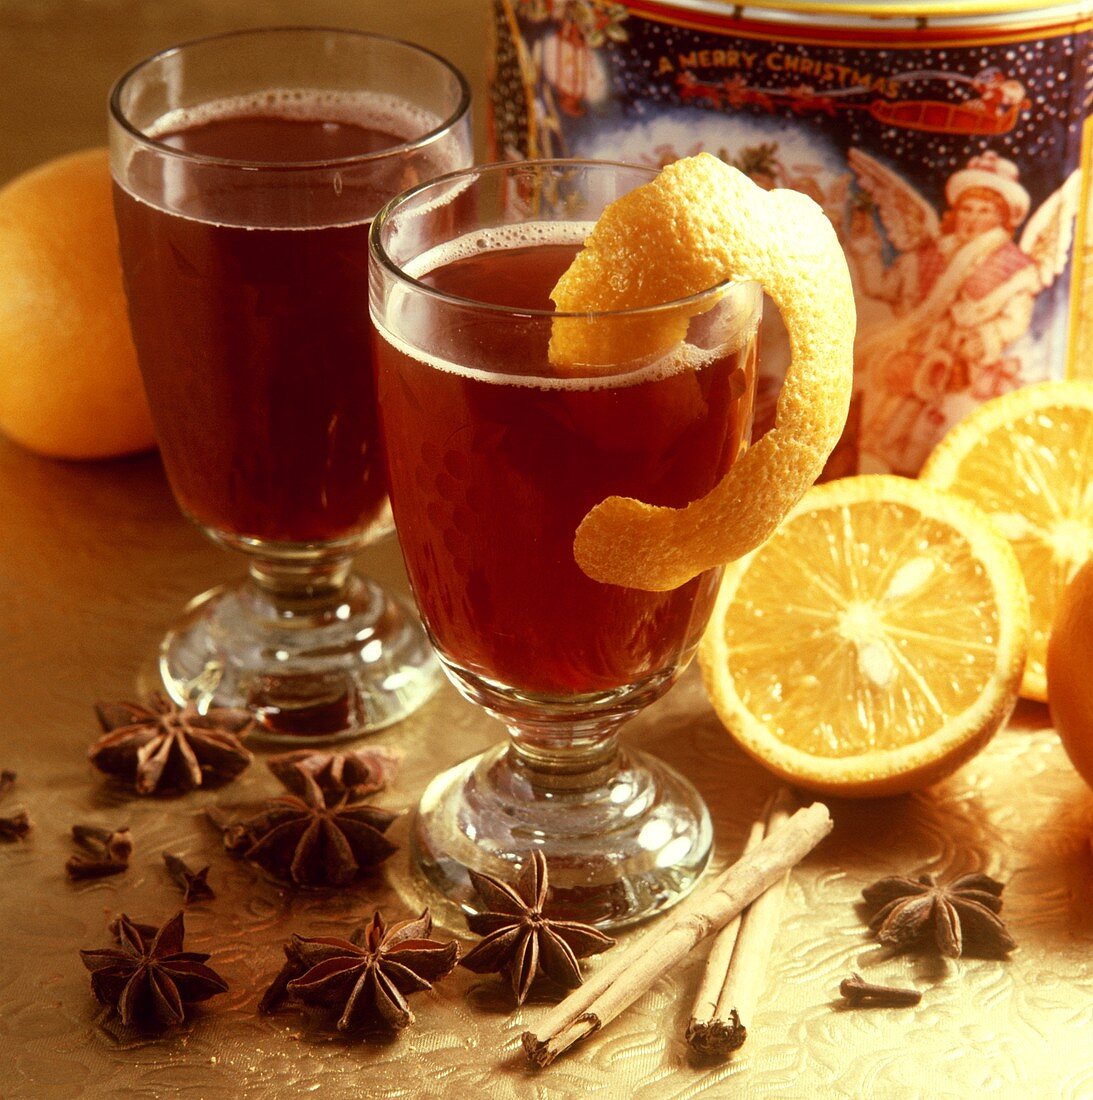 Two glasses of red wine punch with orange peel